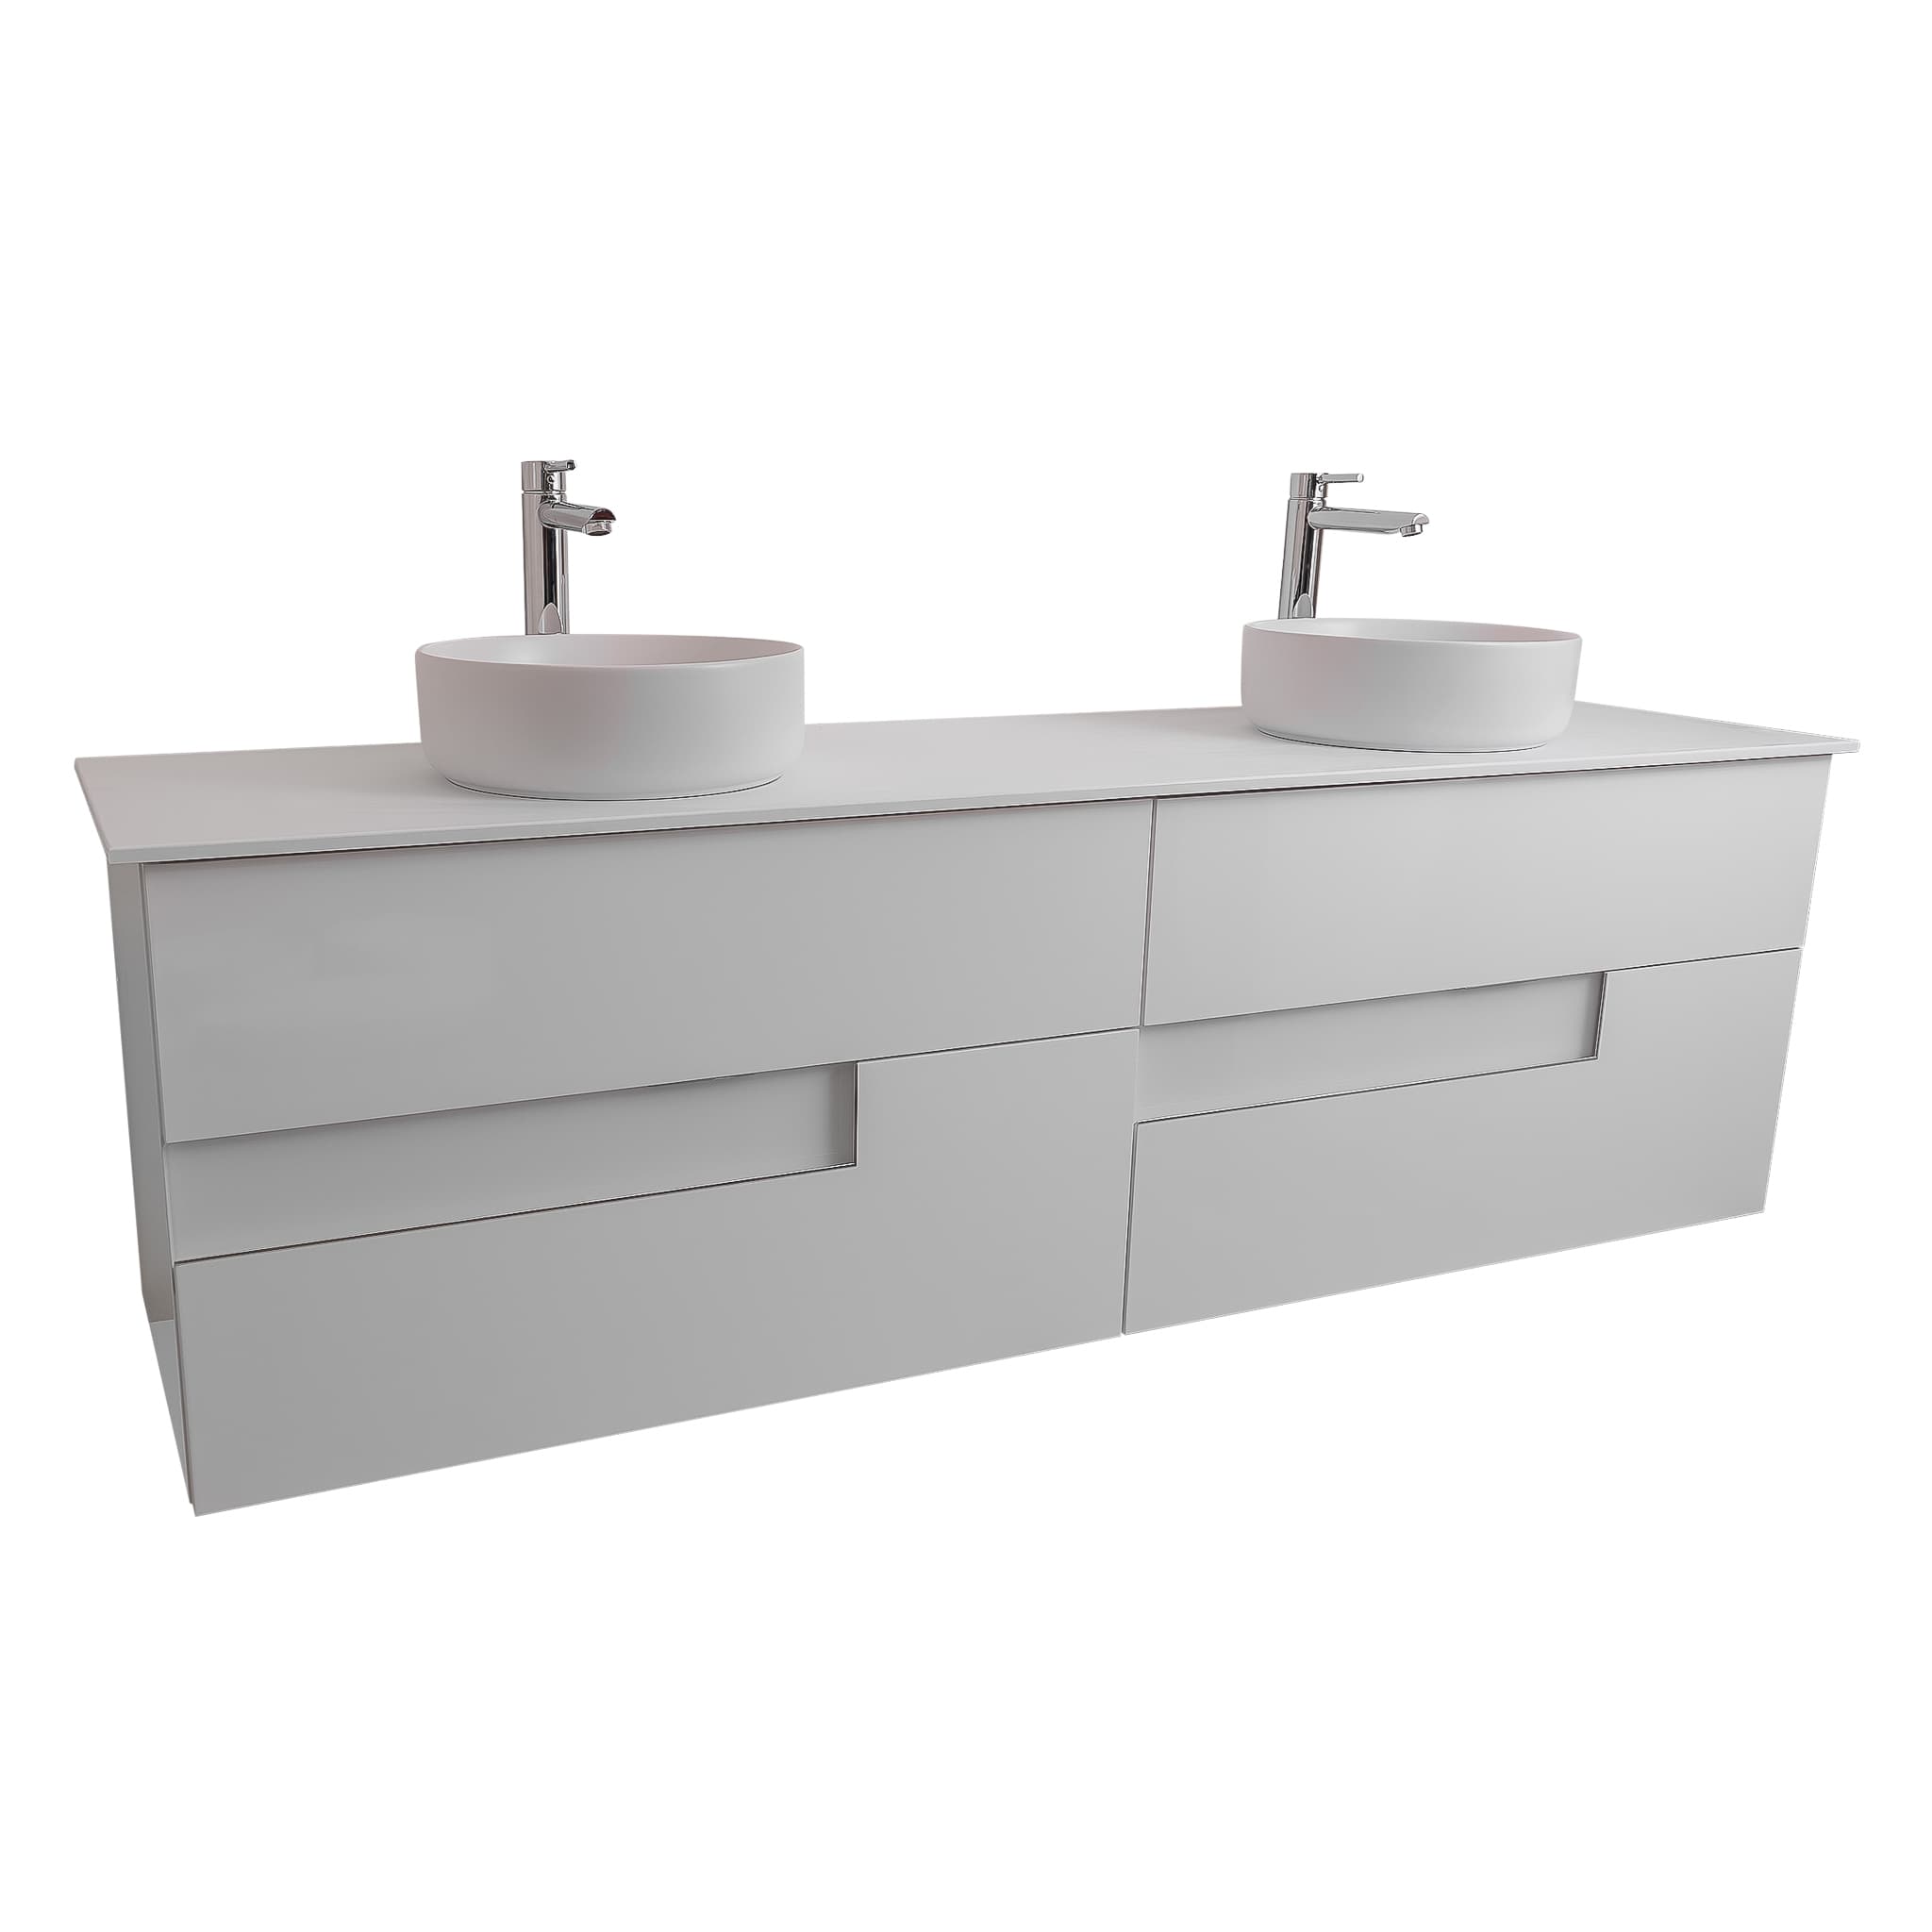 Vision 63 White High Gloss Cabinet, Ares White Top And Two Ares White Ceramic Basin, Wall Mounted Modern Vanity Set